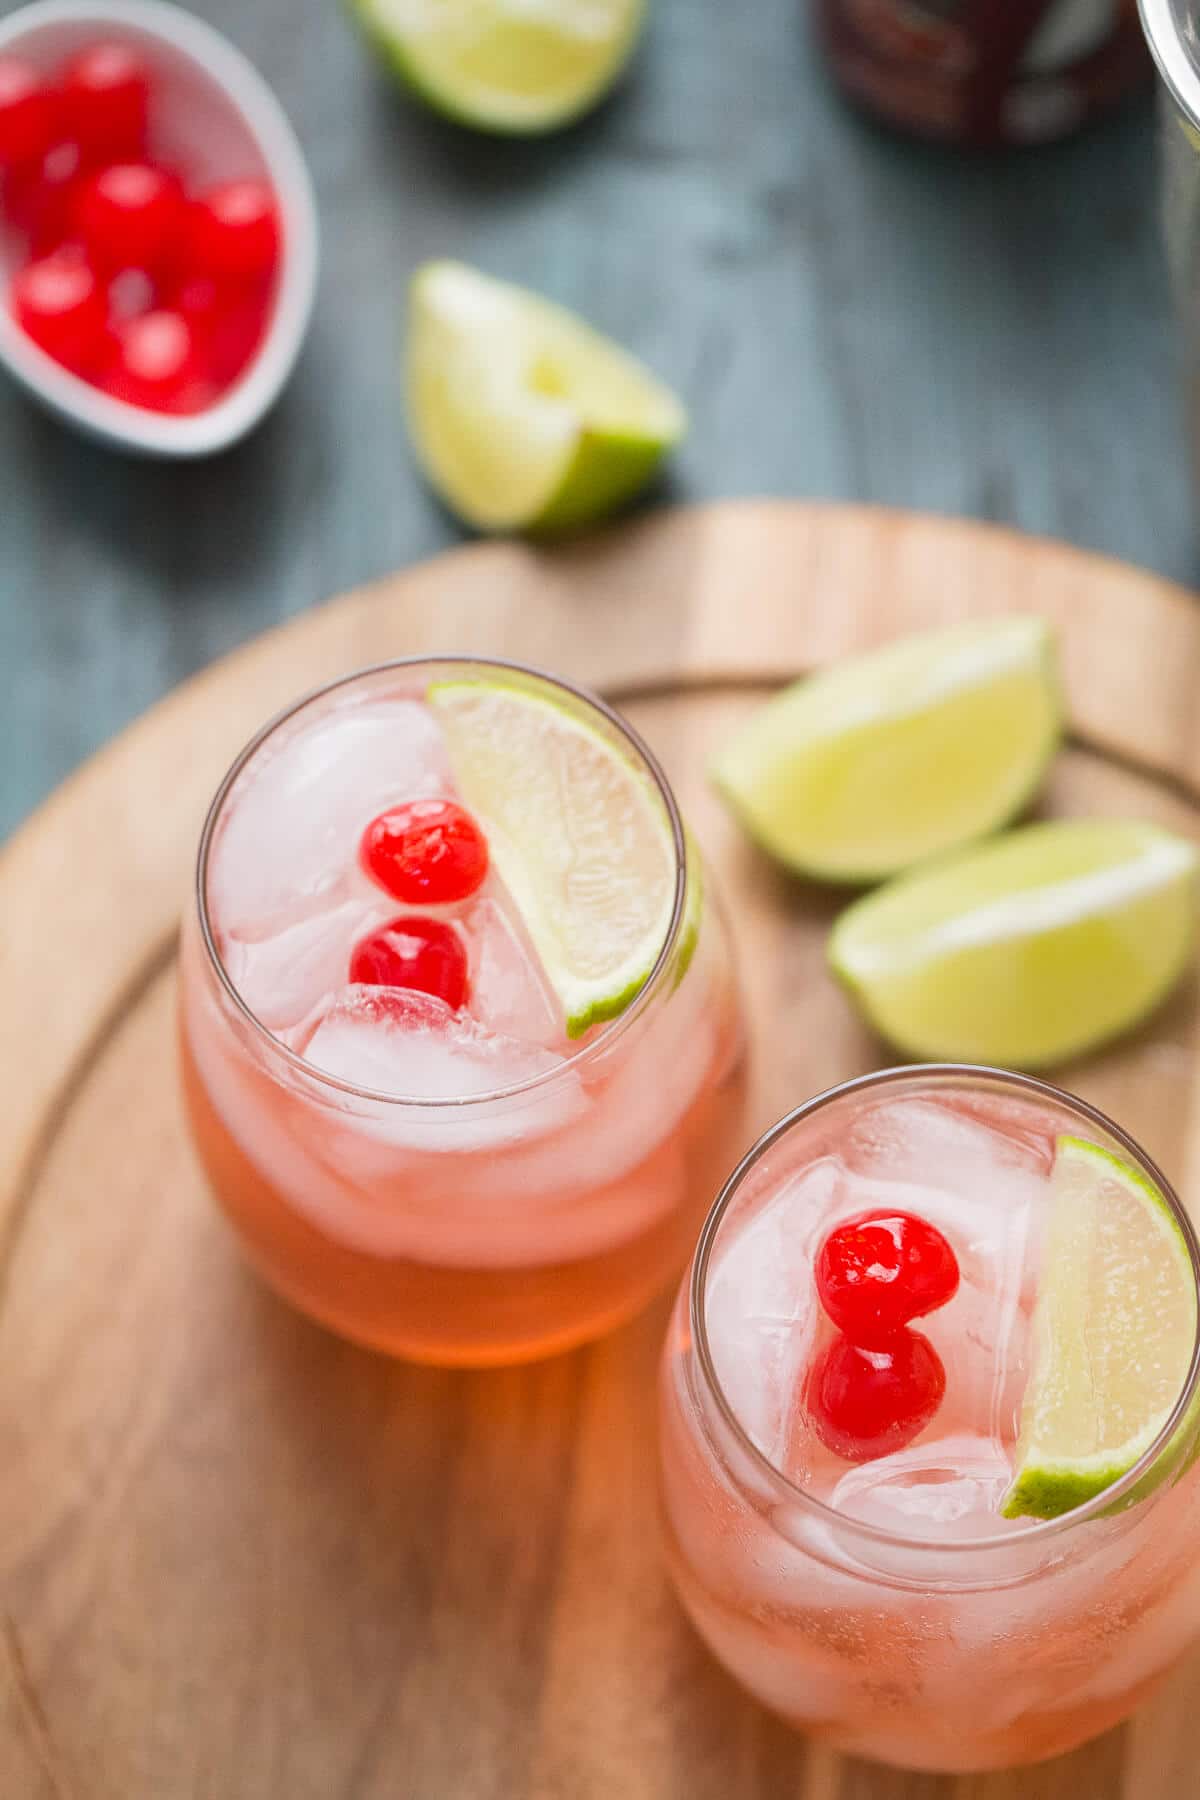 Sour cocktails your thing? Then you have to try this tangy and sweet cherry sour cocktail!